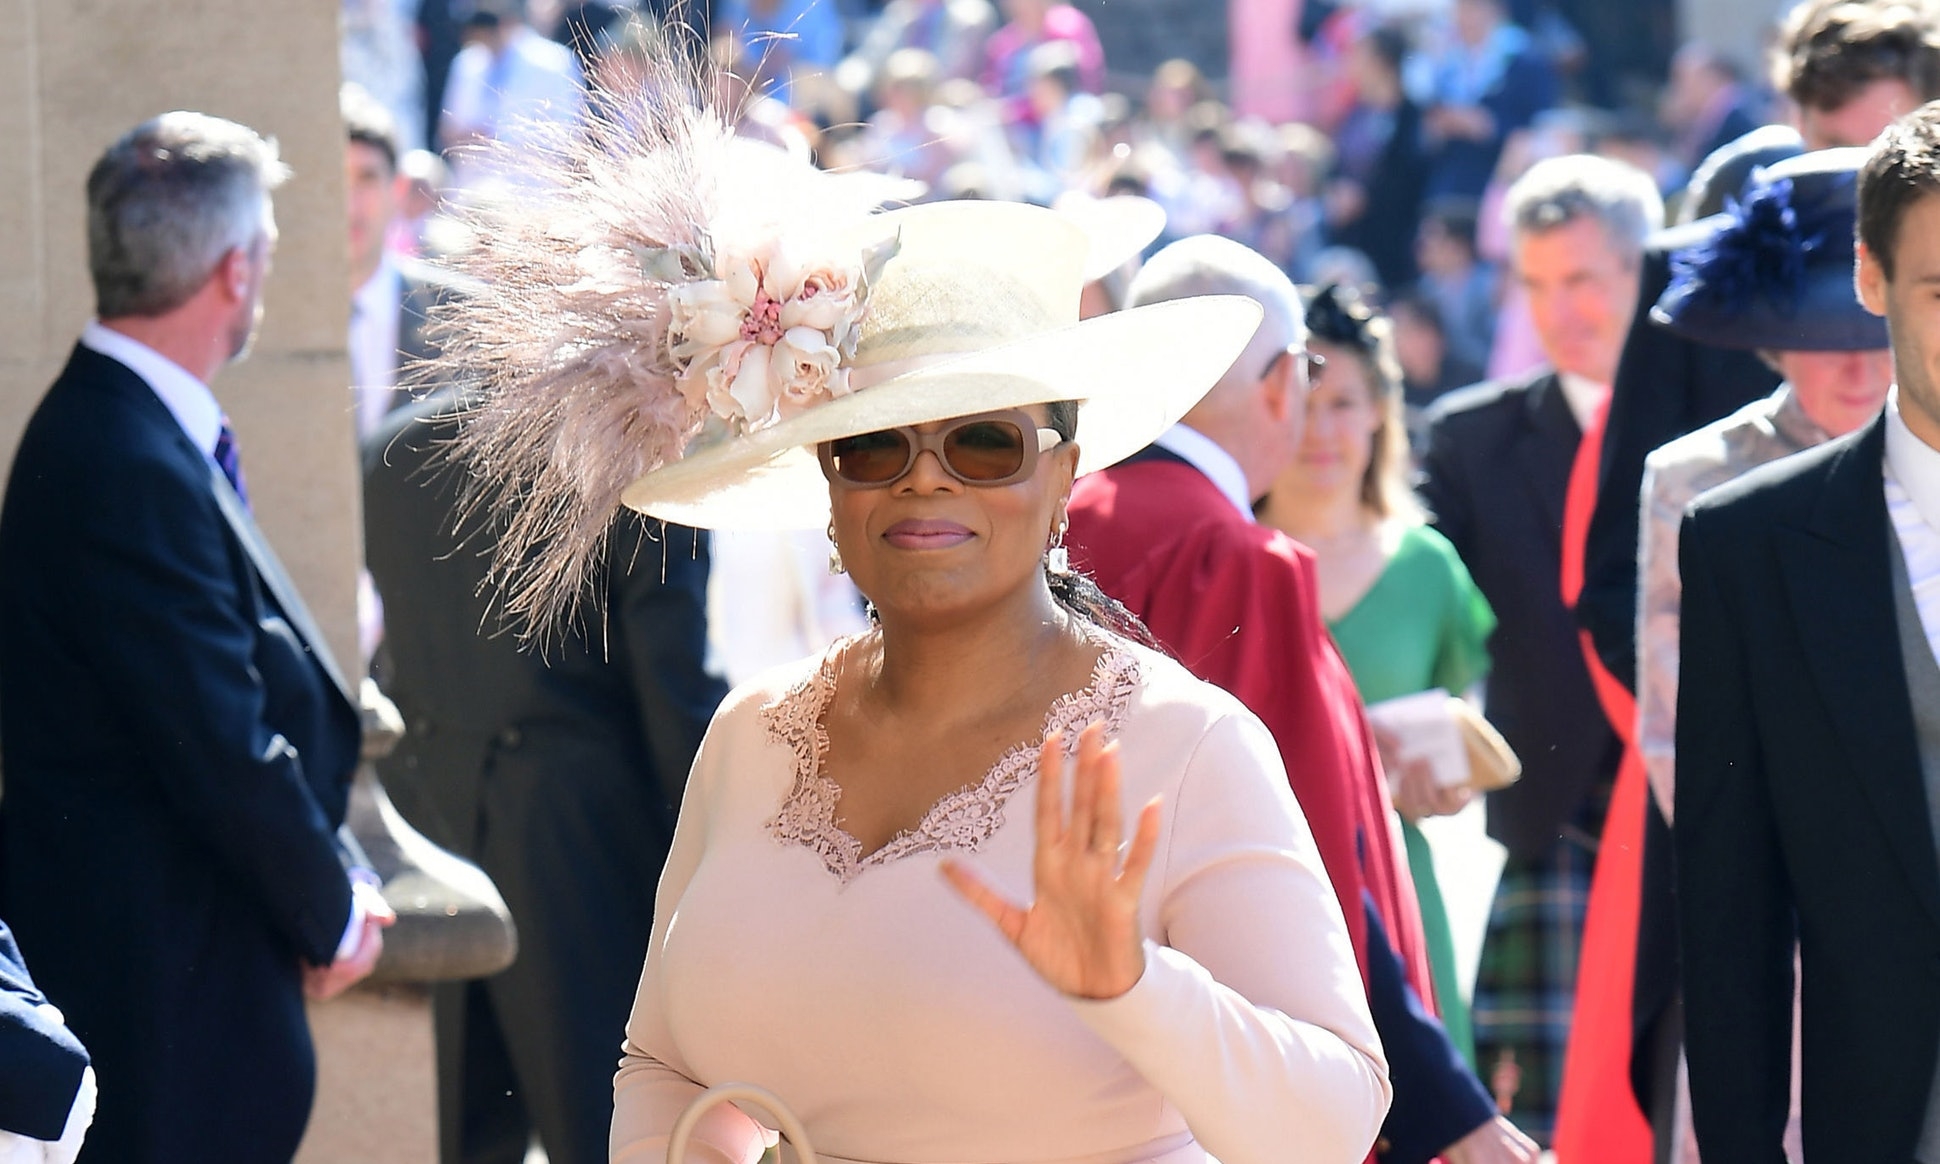 Oprah Winfrey’s Royal Wedding Dress Was Made Overnight For This Considerate Reason